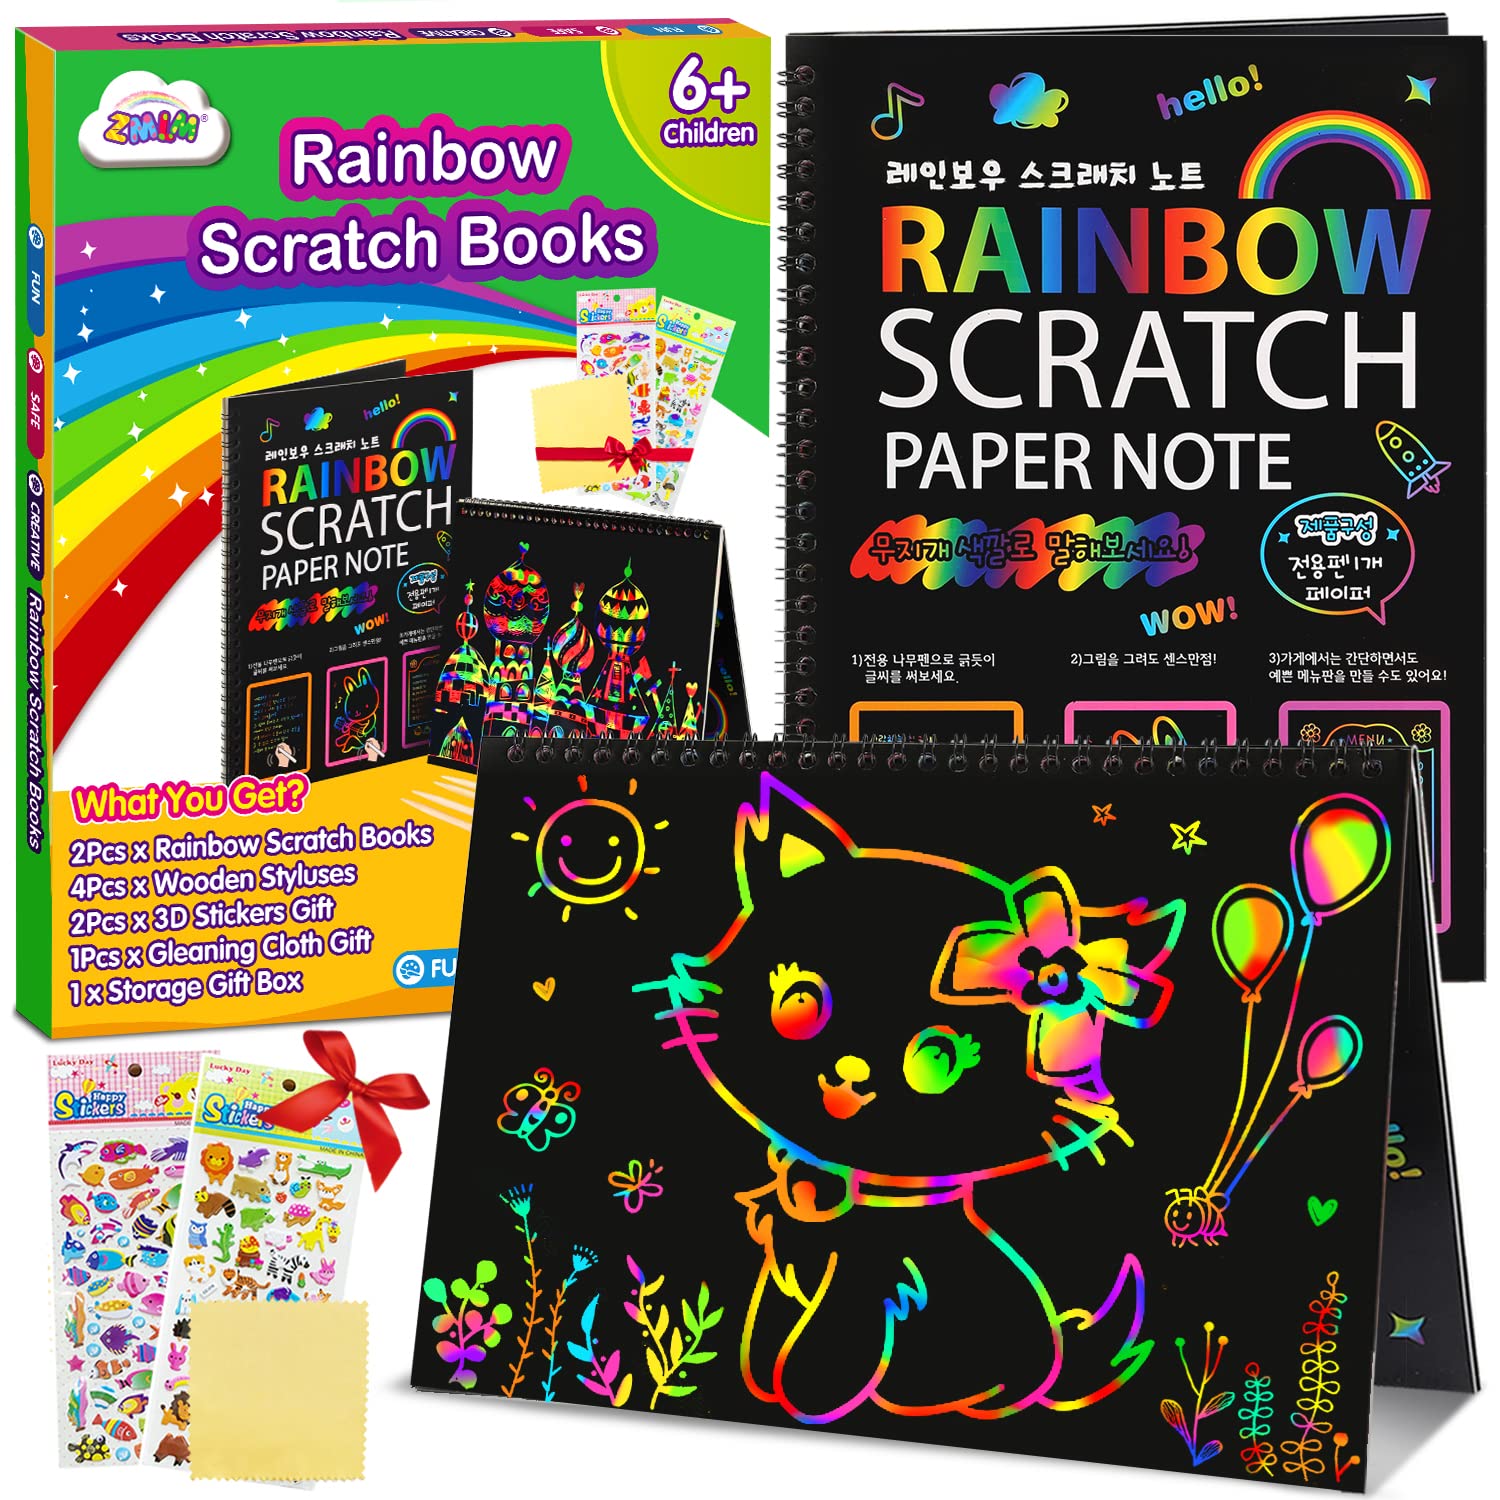 ZMLM Scratch Paper Art Notebooks - Rainbow Scratch Off Art Set for Kids Activity Color Book Pad Black Magic Art Craft Supplies Kits for Girls Boys Birthday Party Favor Game Christmas Toys Gift